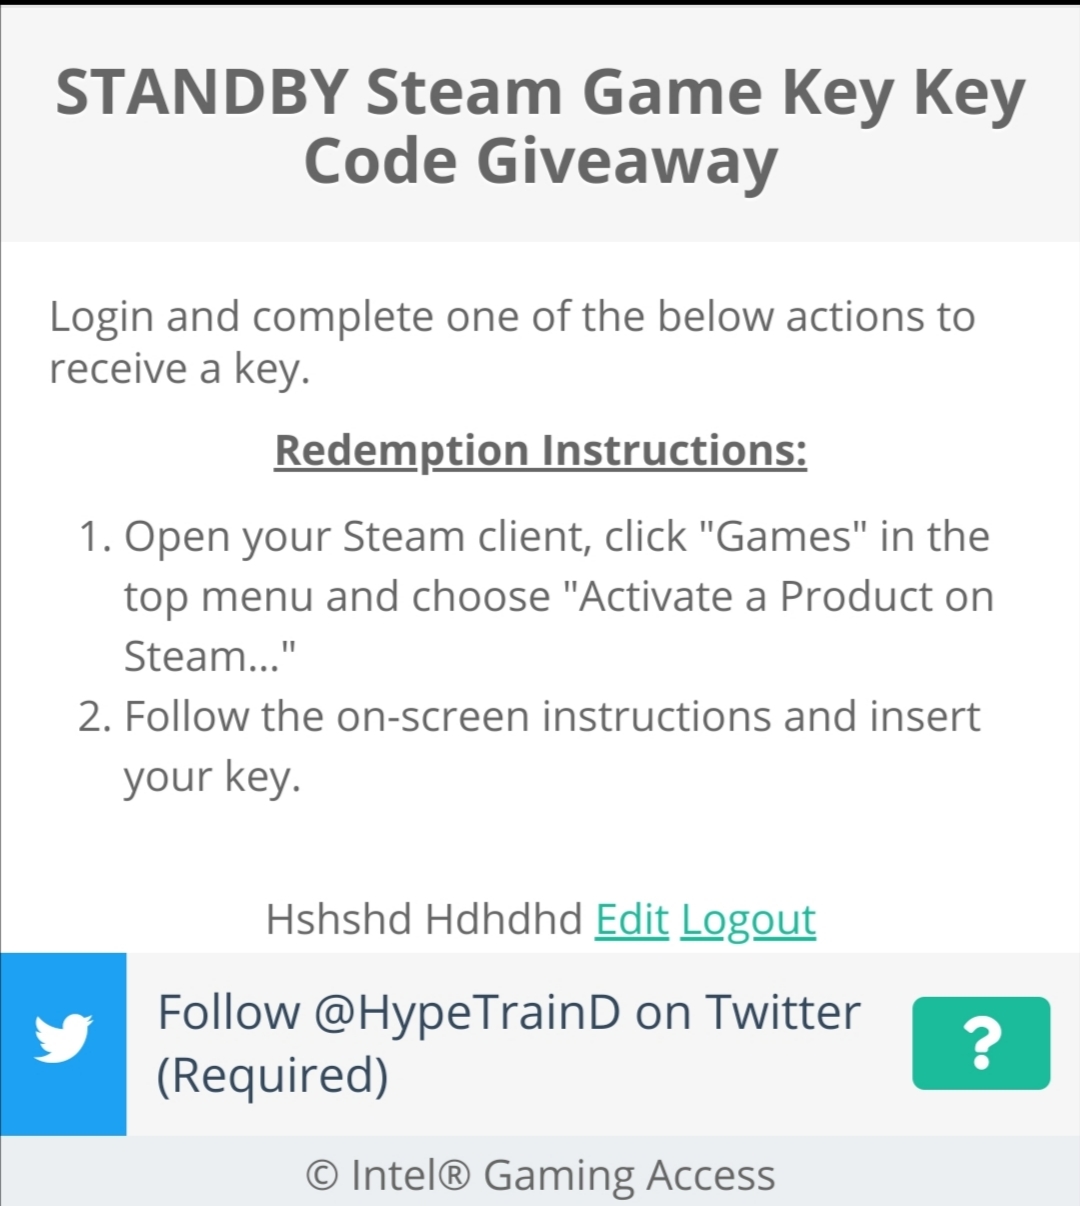 STANDBY for Steam [Giveaway completed] - Freebie, Computer games, Standby